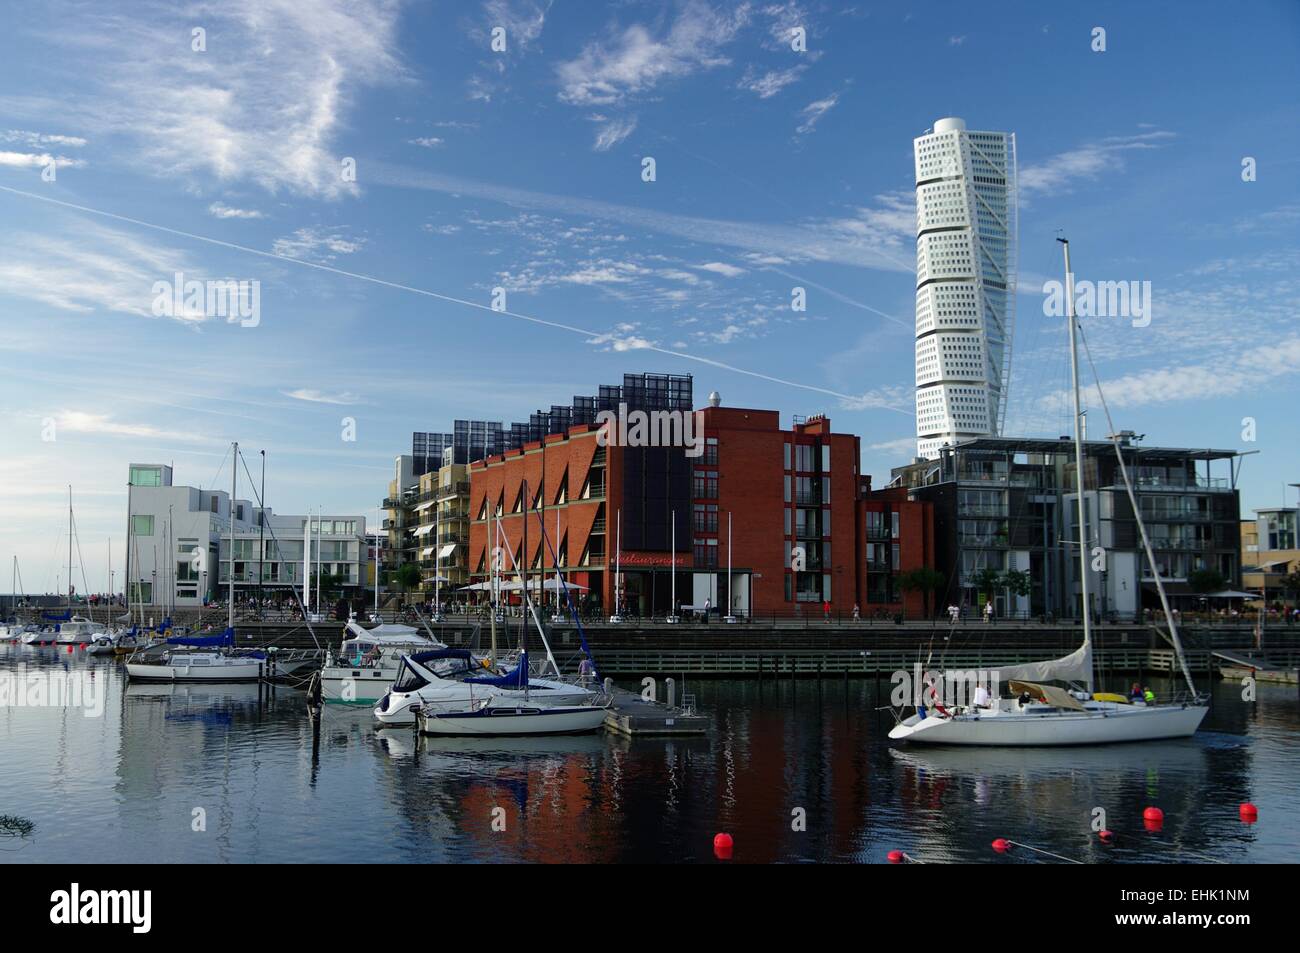 Malmo Western Harbor. An urban renewal project in southern Sweden, combining modern architecture a with sustainability. Stock Photo